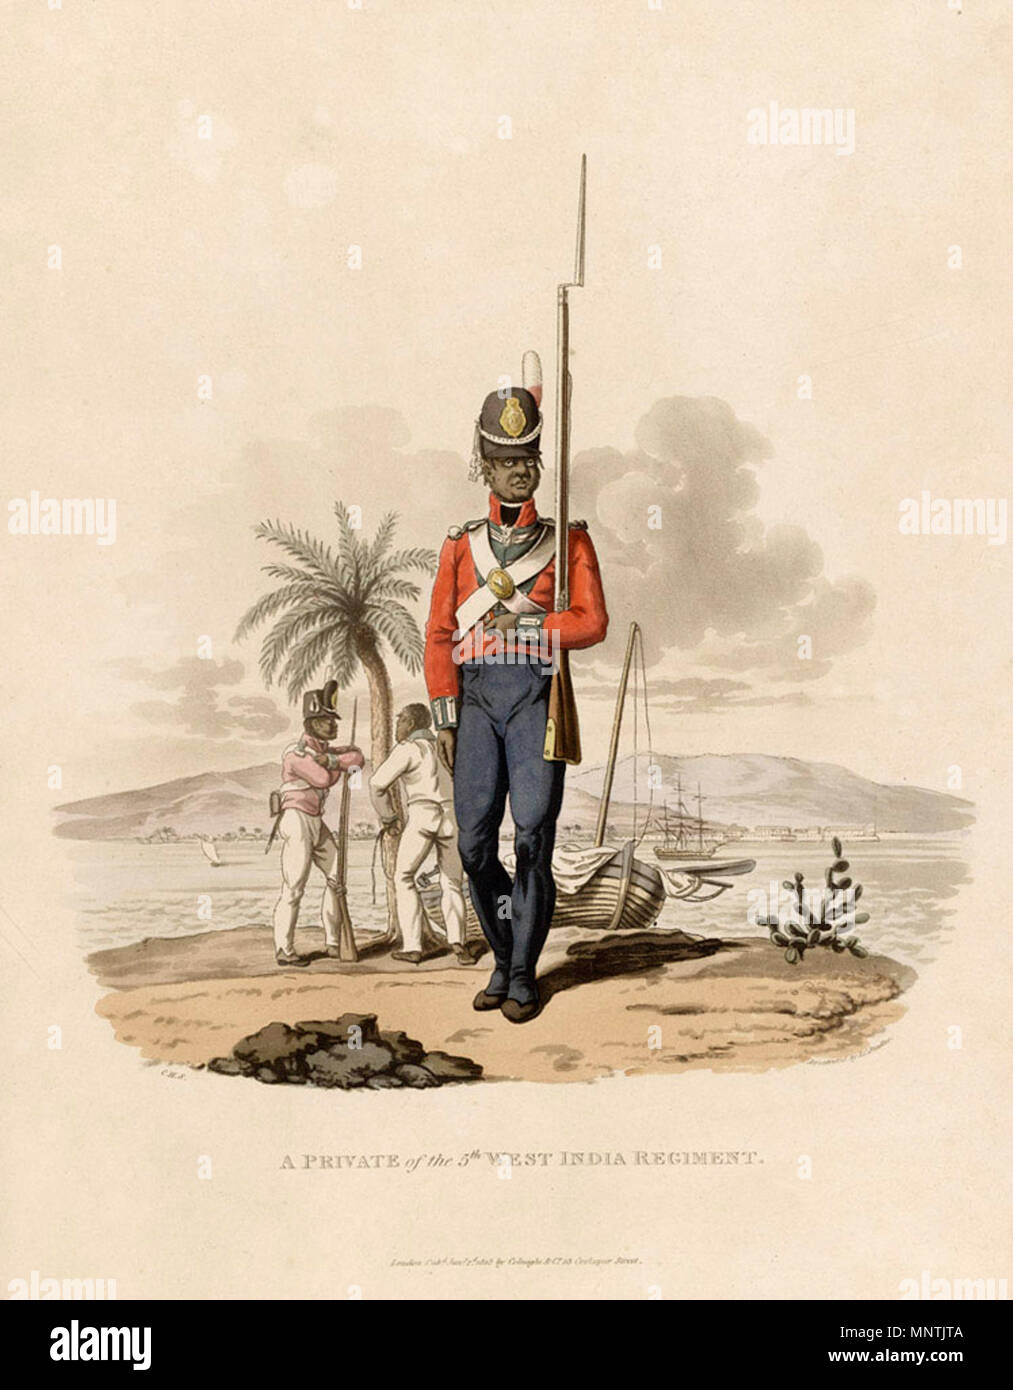 . English: Private of the 5th West India Regiment. Aquatint by J. C. Stadler after Charles Hamilton Smith, 1812. Many European soldiers stationed in the Caribbean succumbed to tropical diseases. The failed British intervention in Saint Domingue (modern Haiti) was also very costly in manpower terms. The Army was forced to look elsewhere for recruits and between 1795 and 1807 estimates suggest 13,400 Creole and newly-arrived Africans slaves were purchased for the West India Regiments. The reliance on slave conscripts was a factor in the prolongation of the slave trade to 1807. Most slave soldier Stock Photo